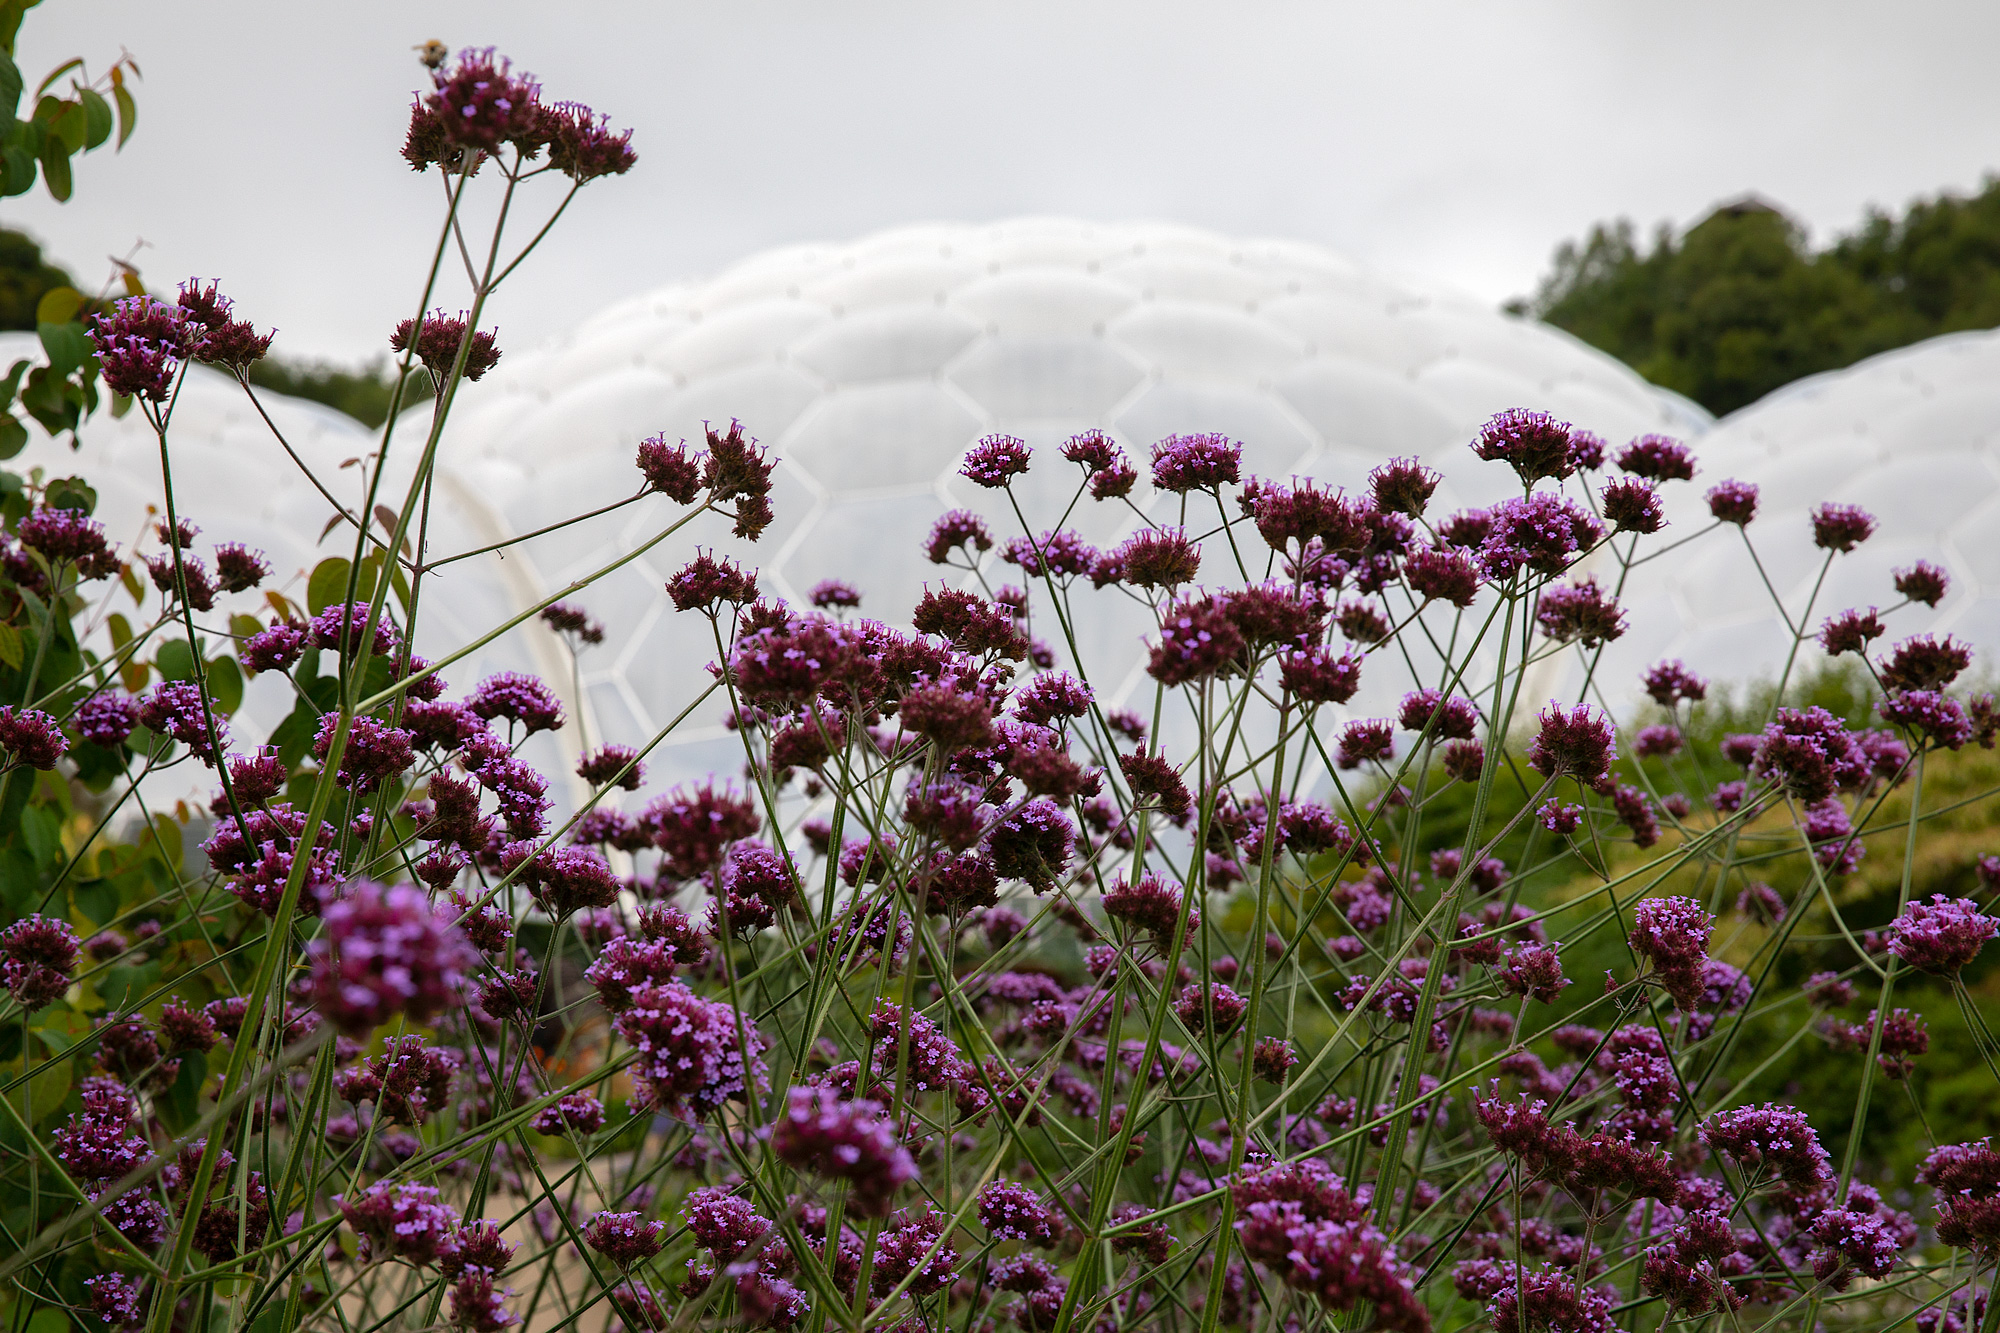 Photographing the Eden Project